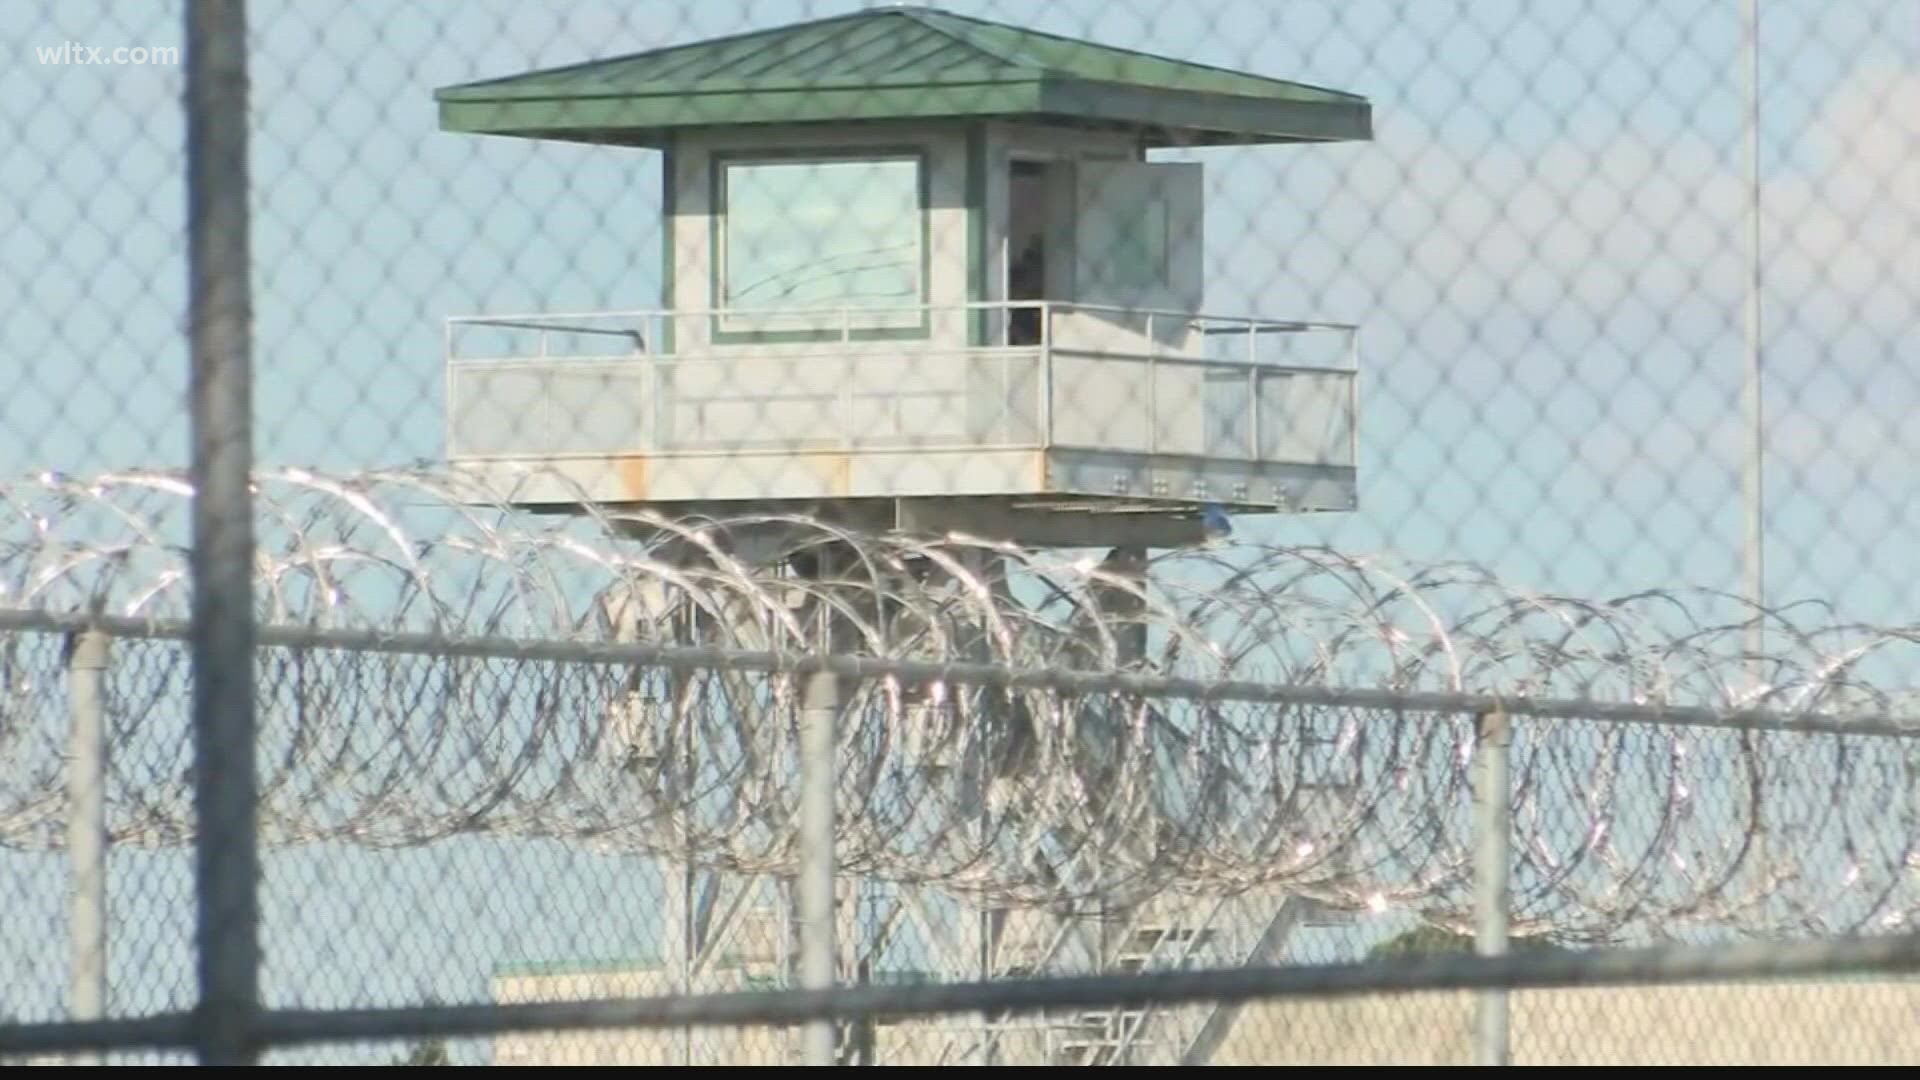 South Carolina corrections officials will move forward with $92 million in improvement projects at prisons statewide after lawmakers’ approval.